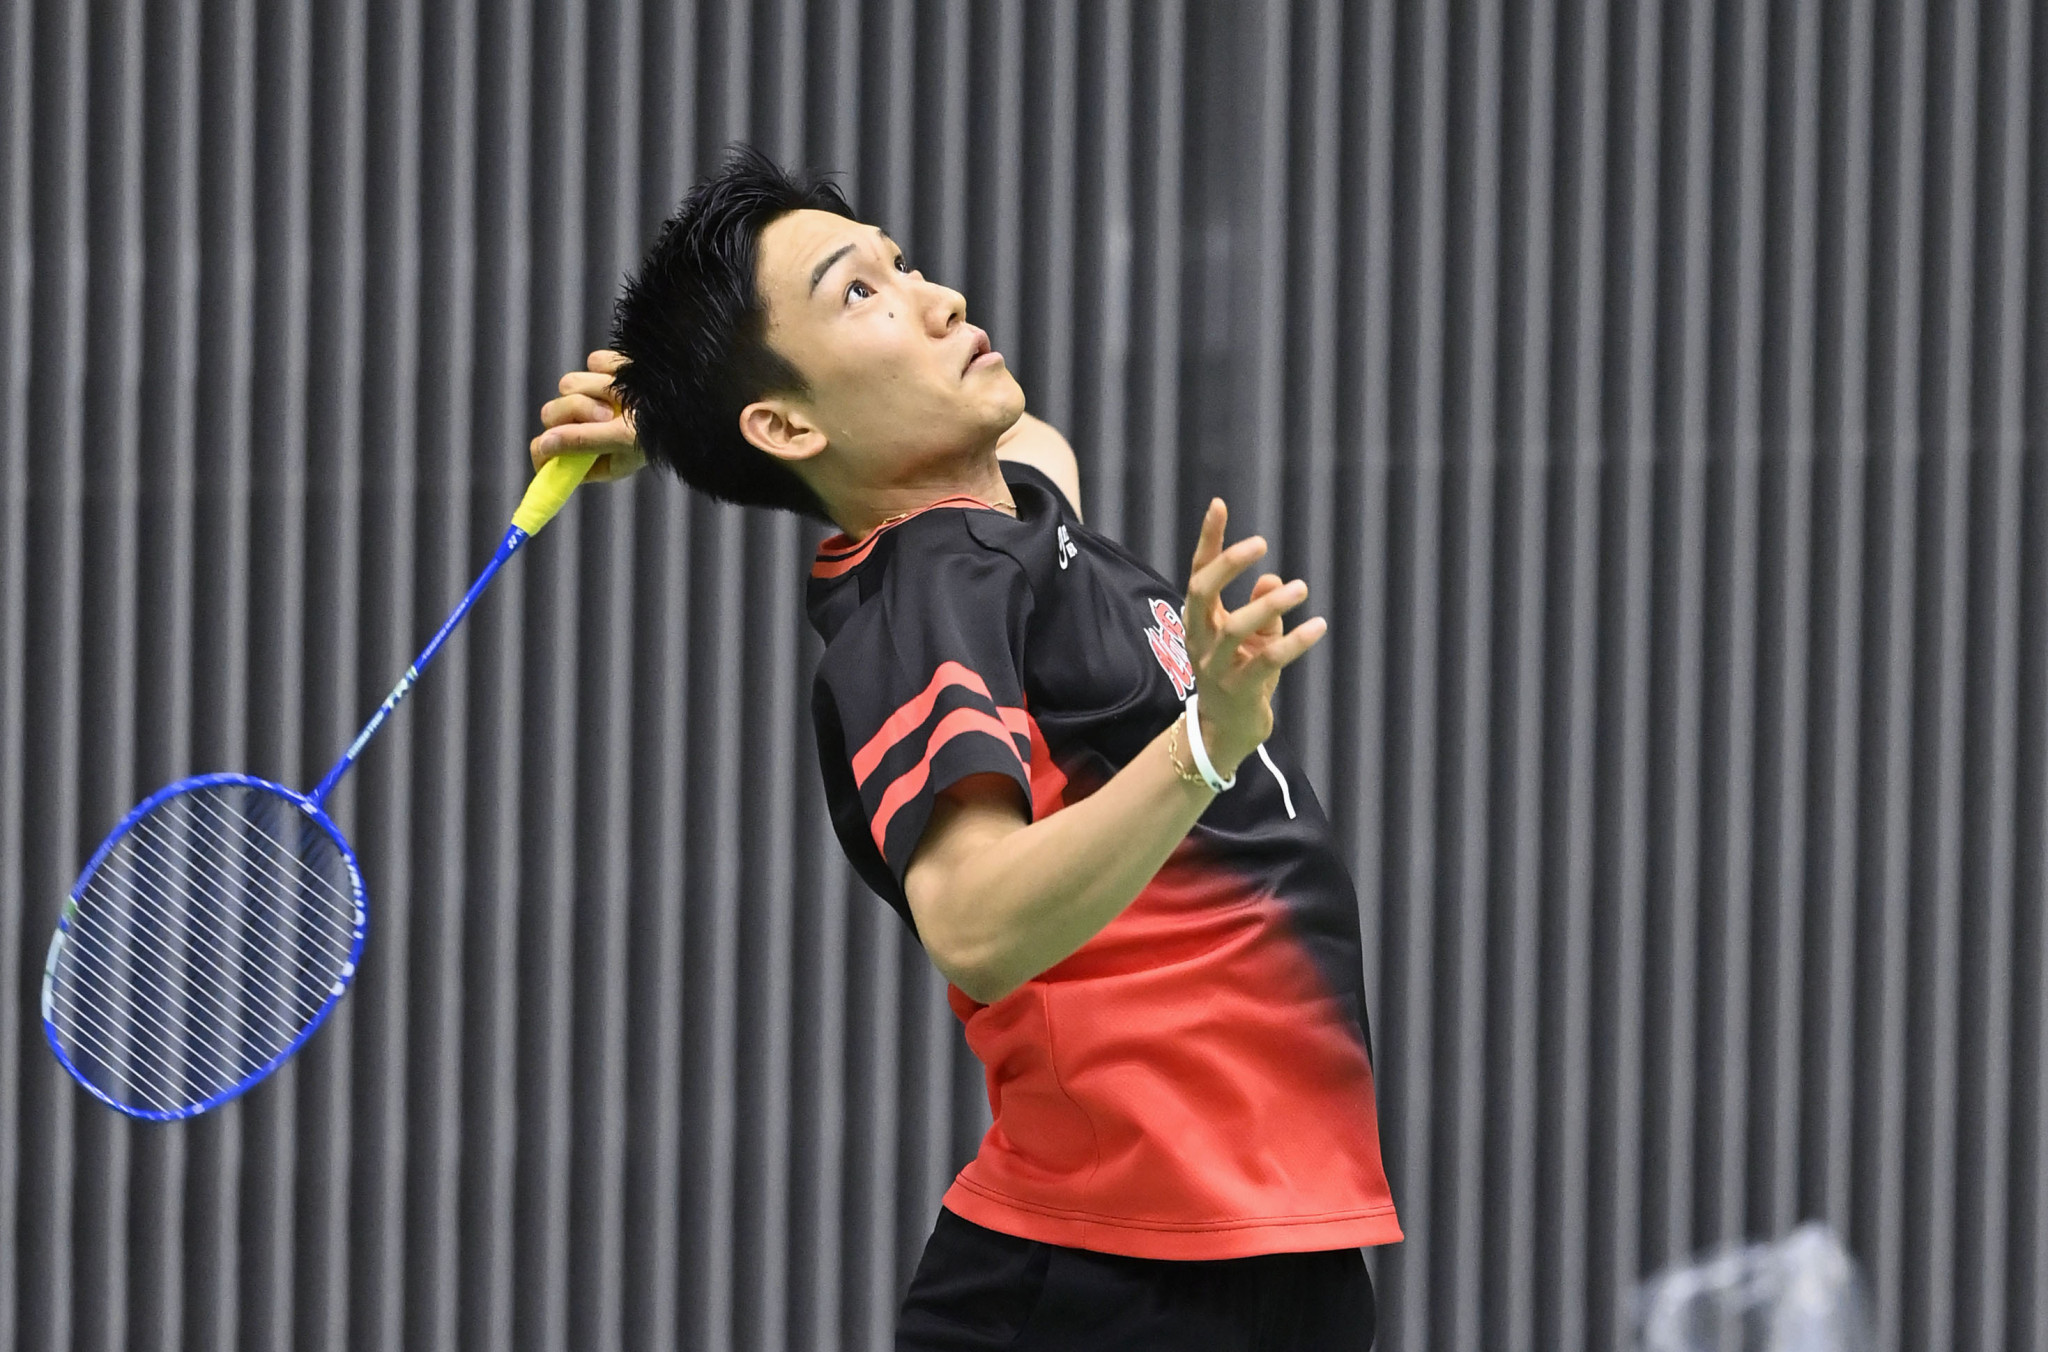 Kento Momota won the men's singles title at Japan's National Badminton Championships last month to cap a successful return to competition ©Getty Images